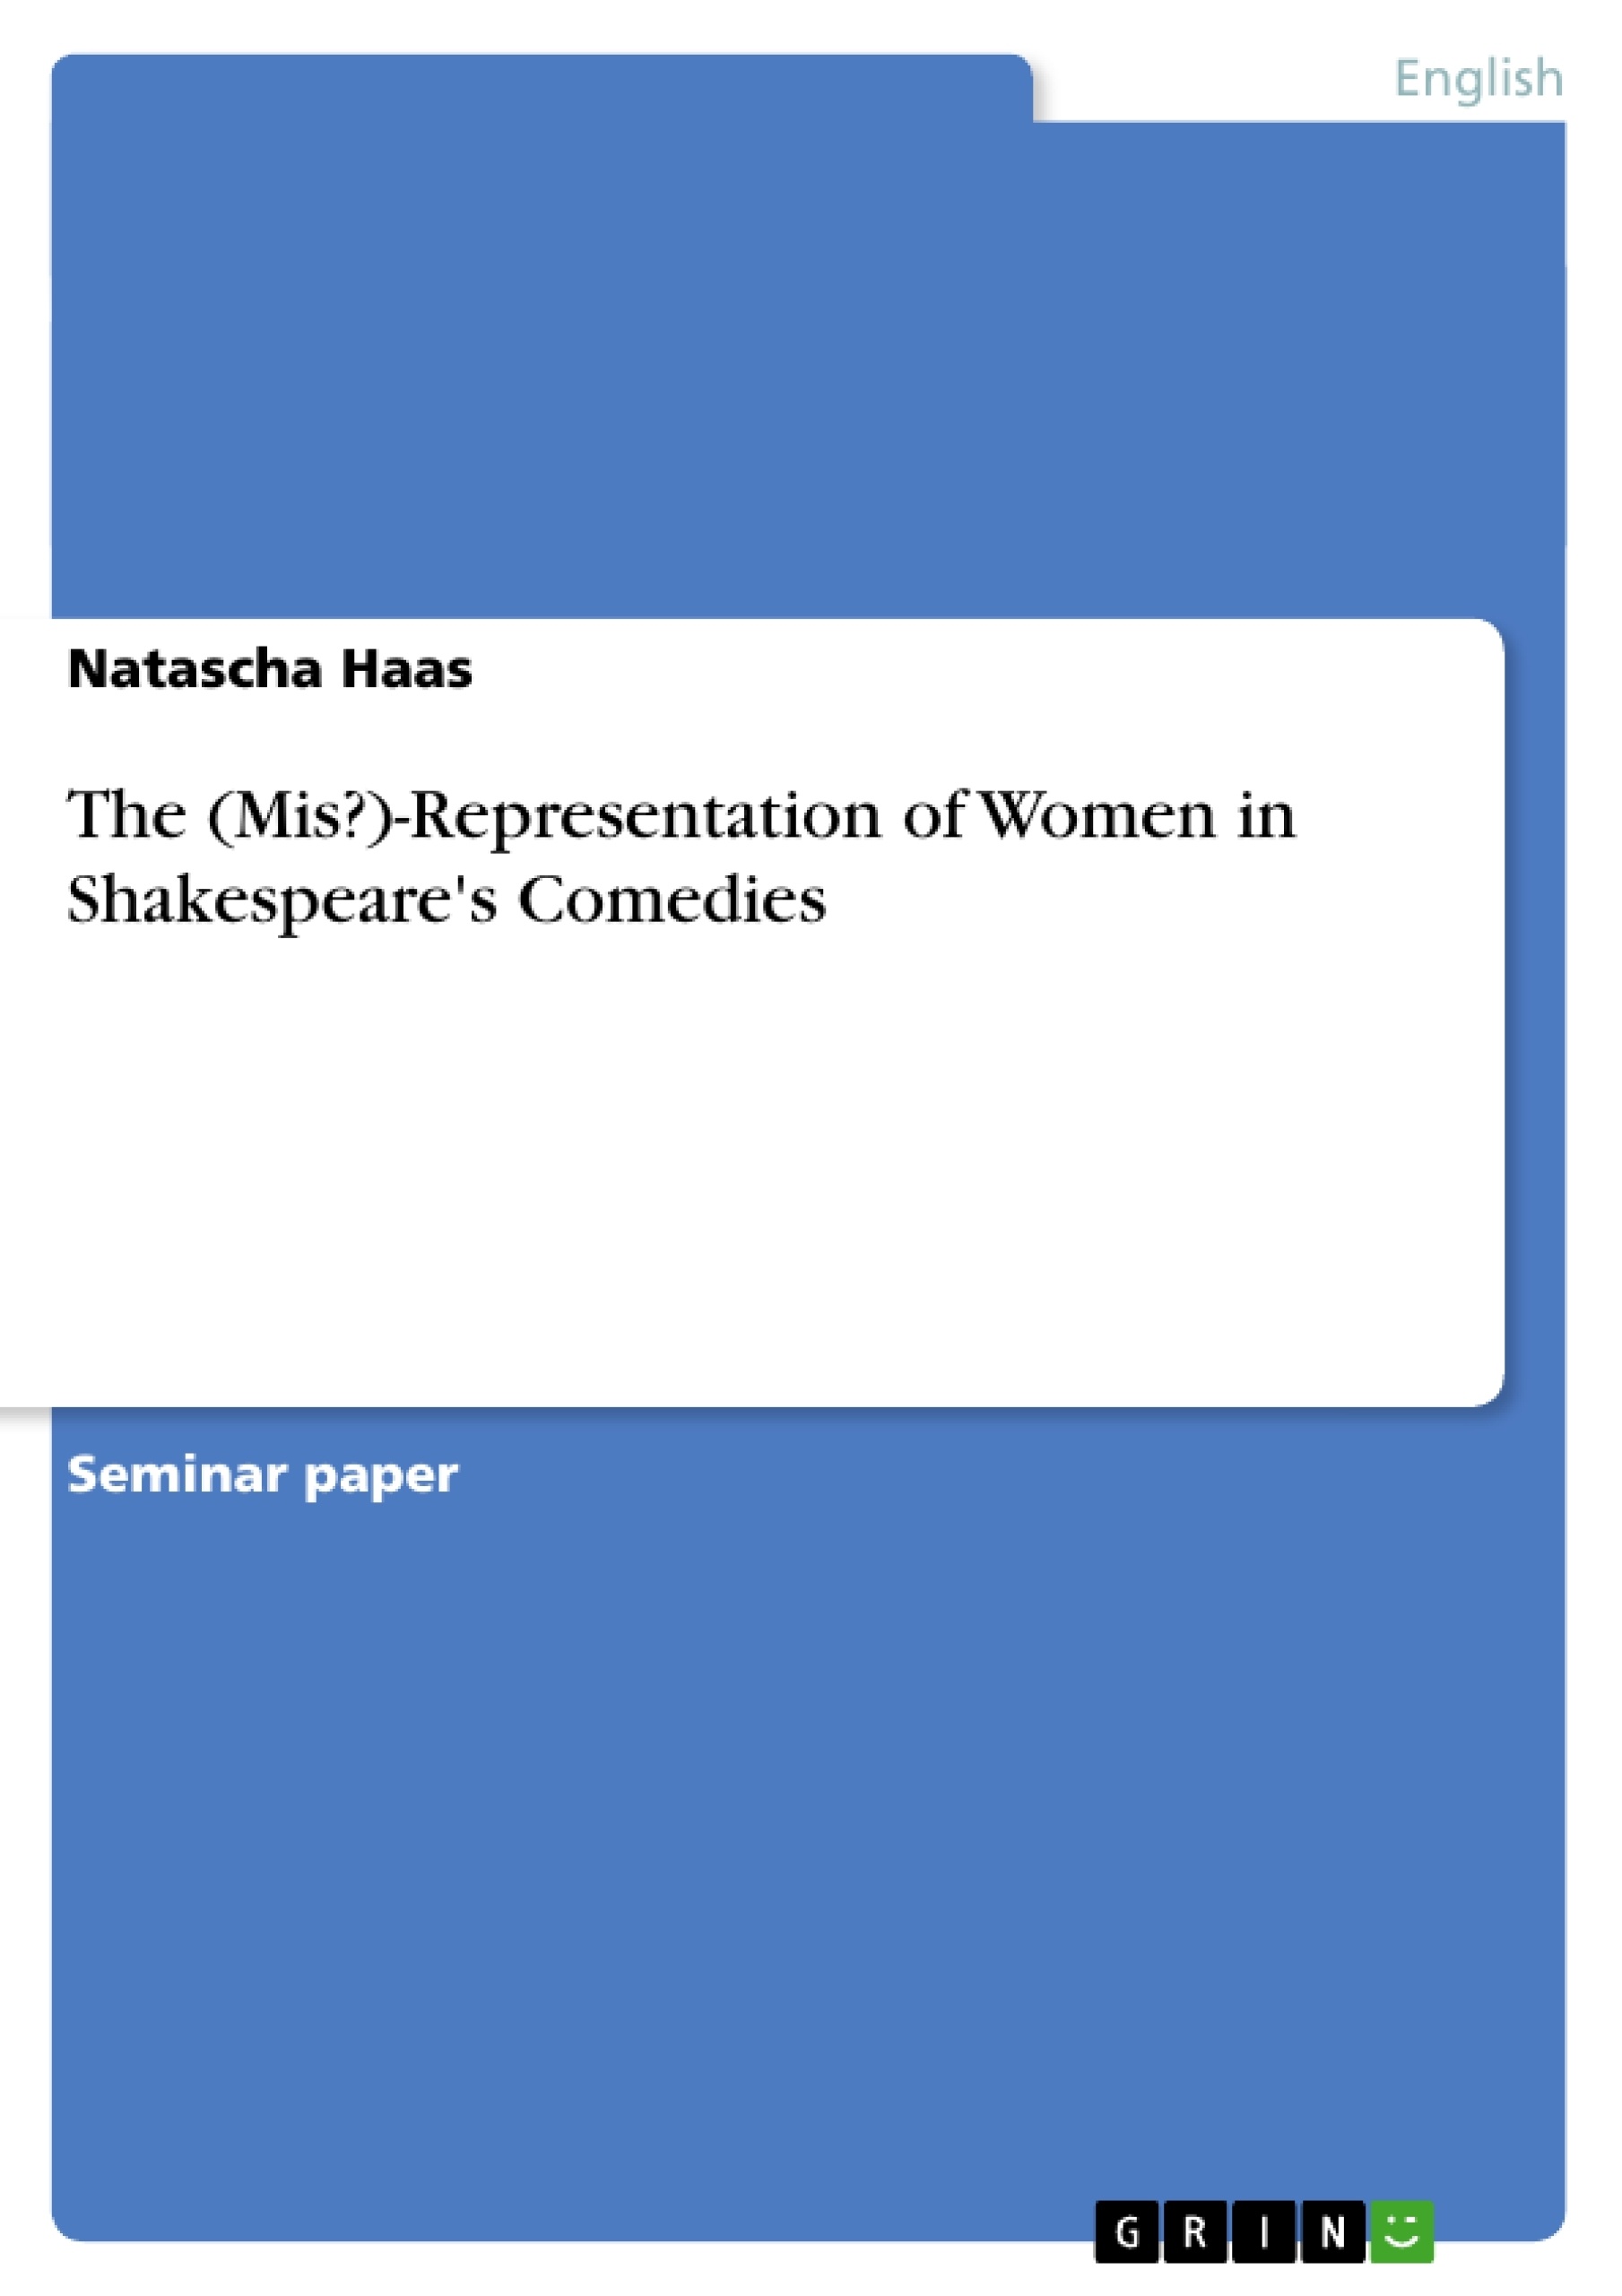 Titre: The (Mis?)-Representation of Women in Shakespeare's Comedies